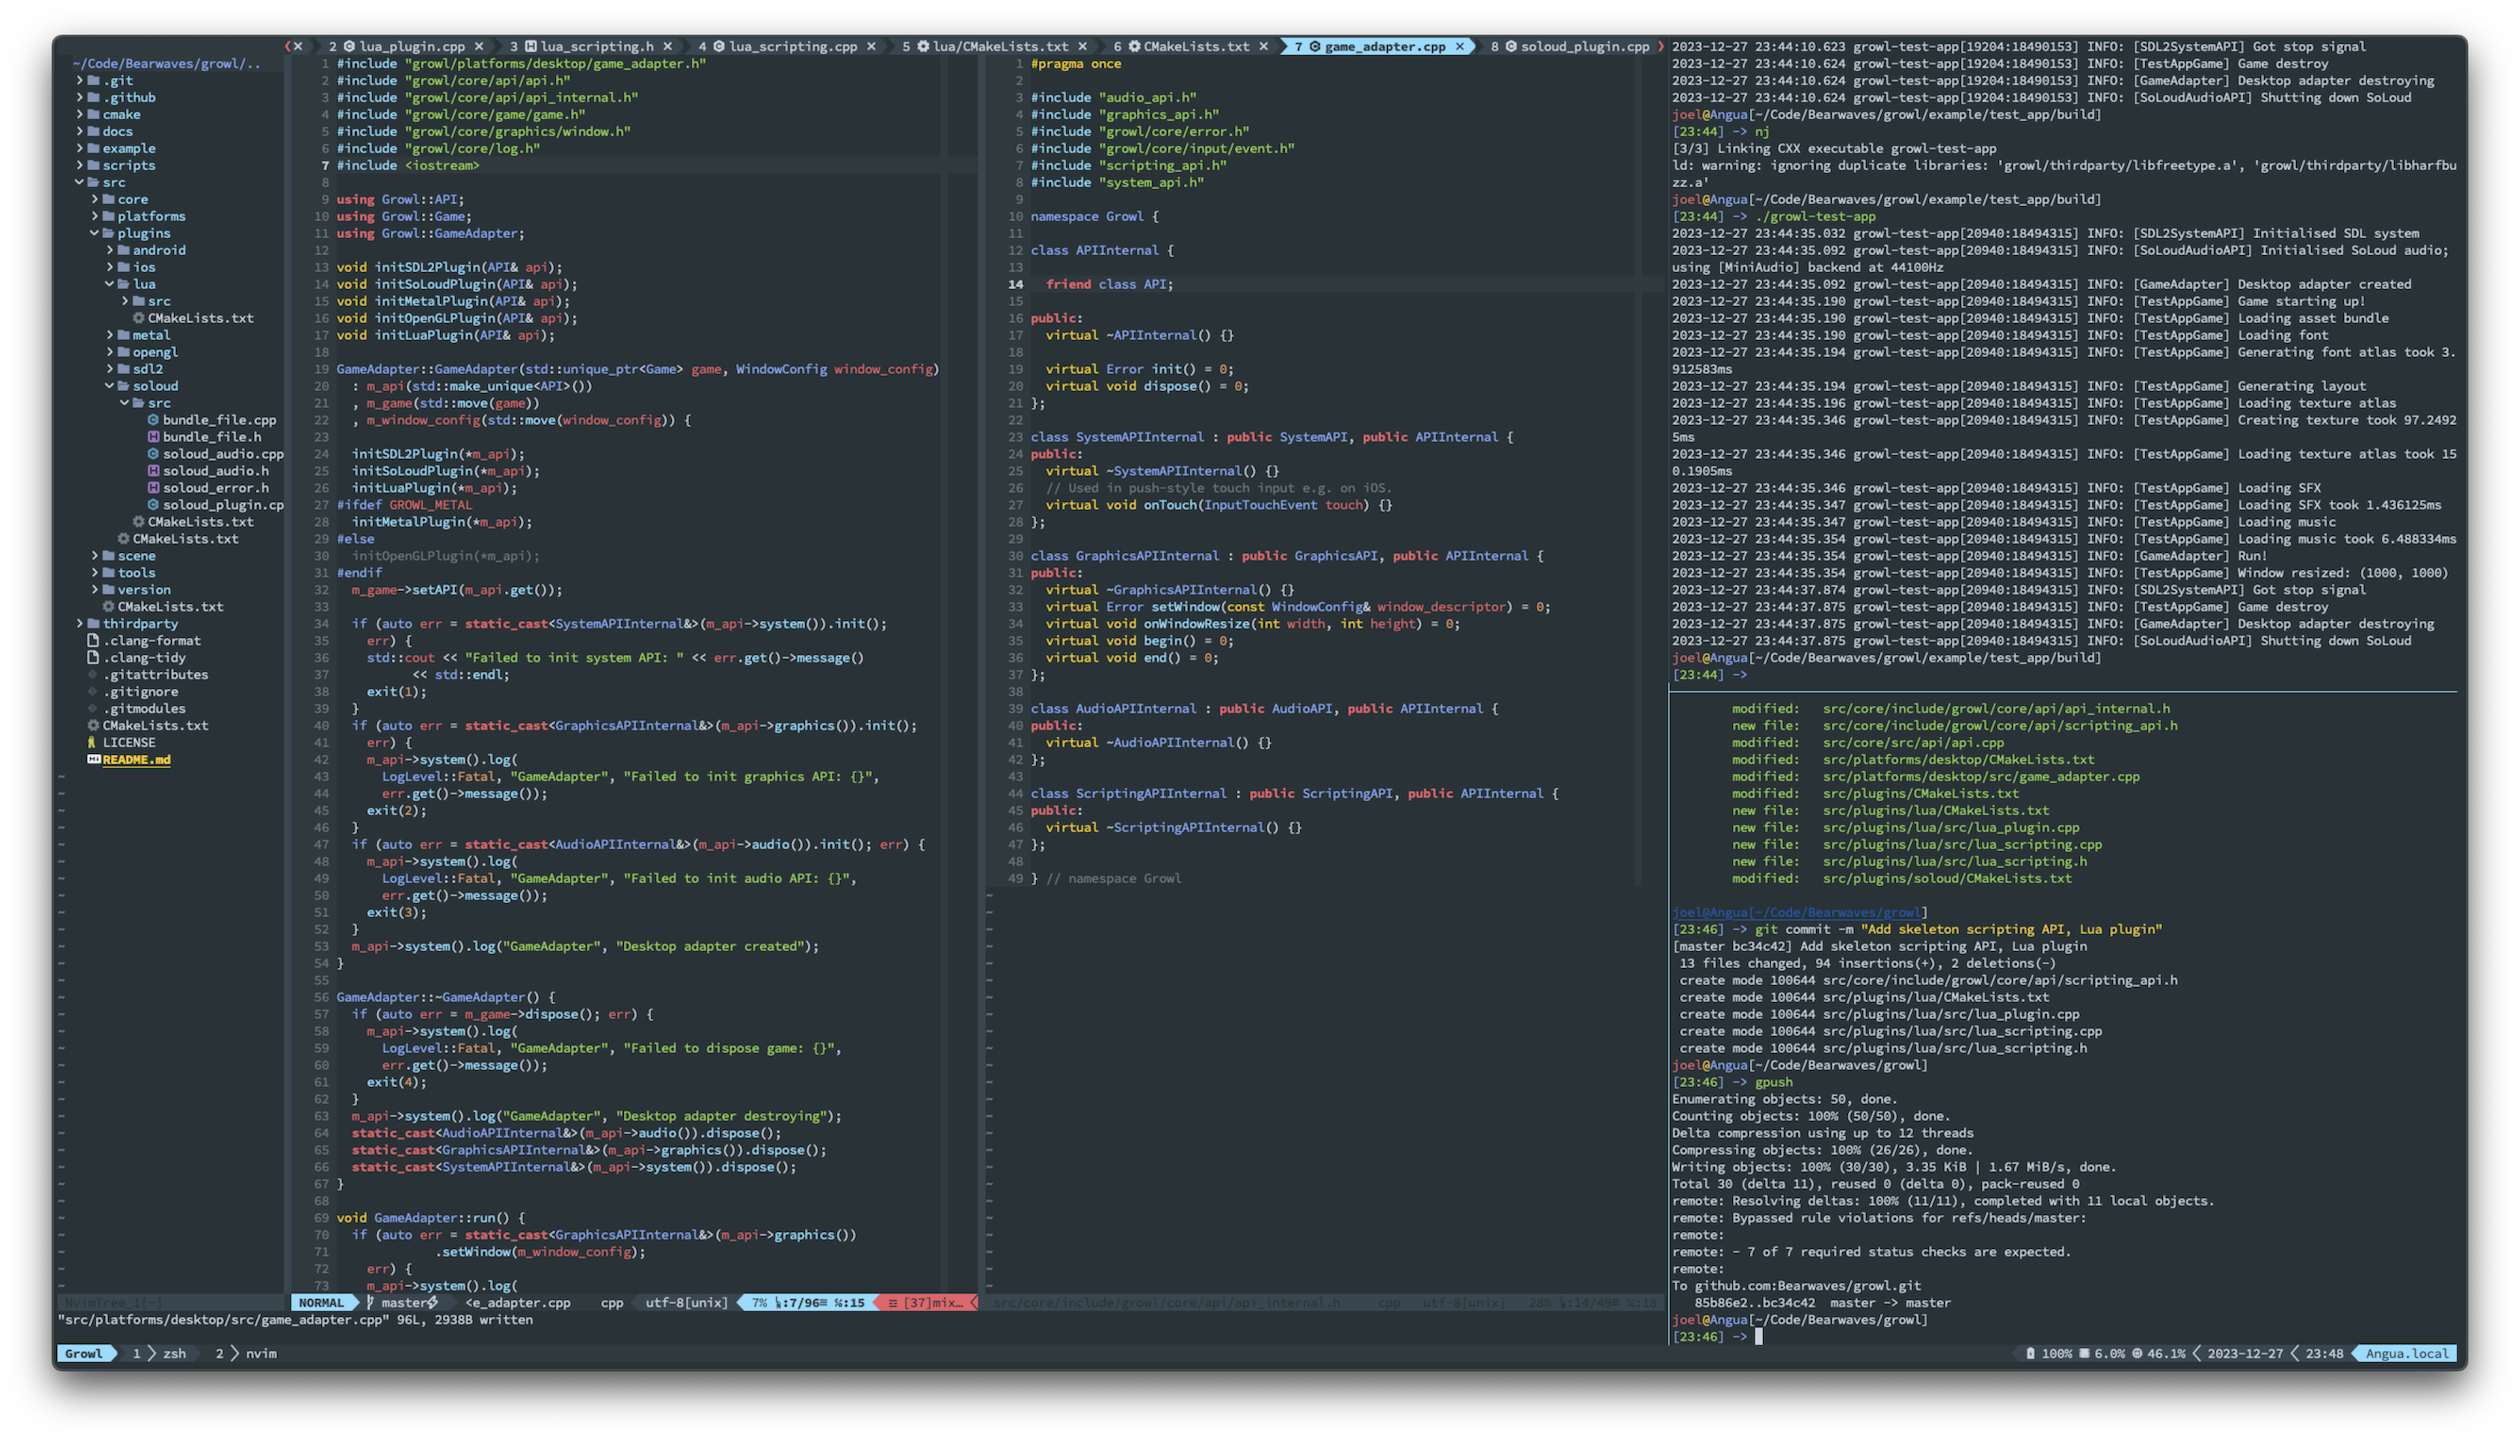 A screenshot of my Vim setup. There are two panes of code with a sidebar showing a file explorer, along with two other tmux panes.